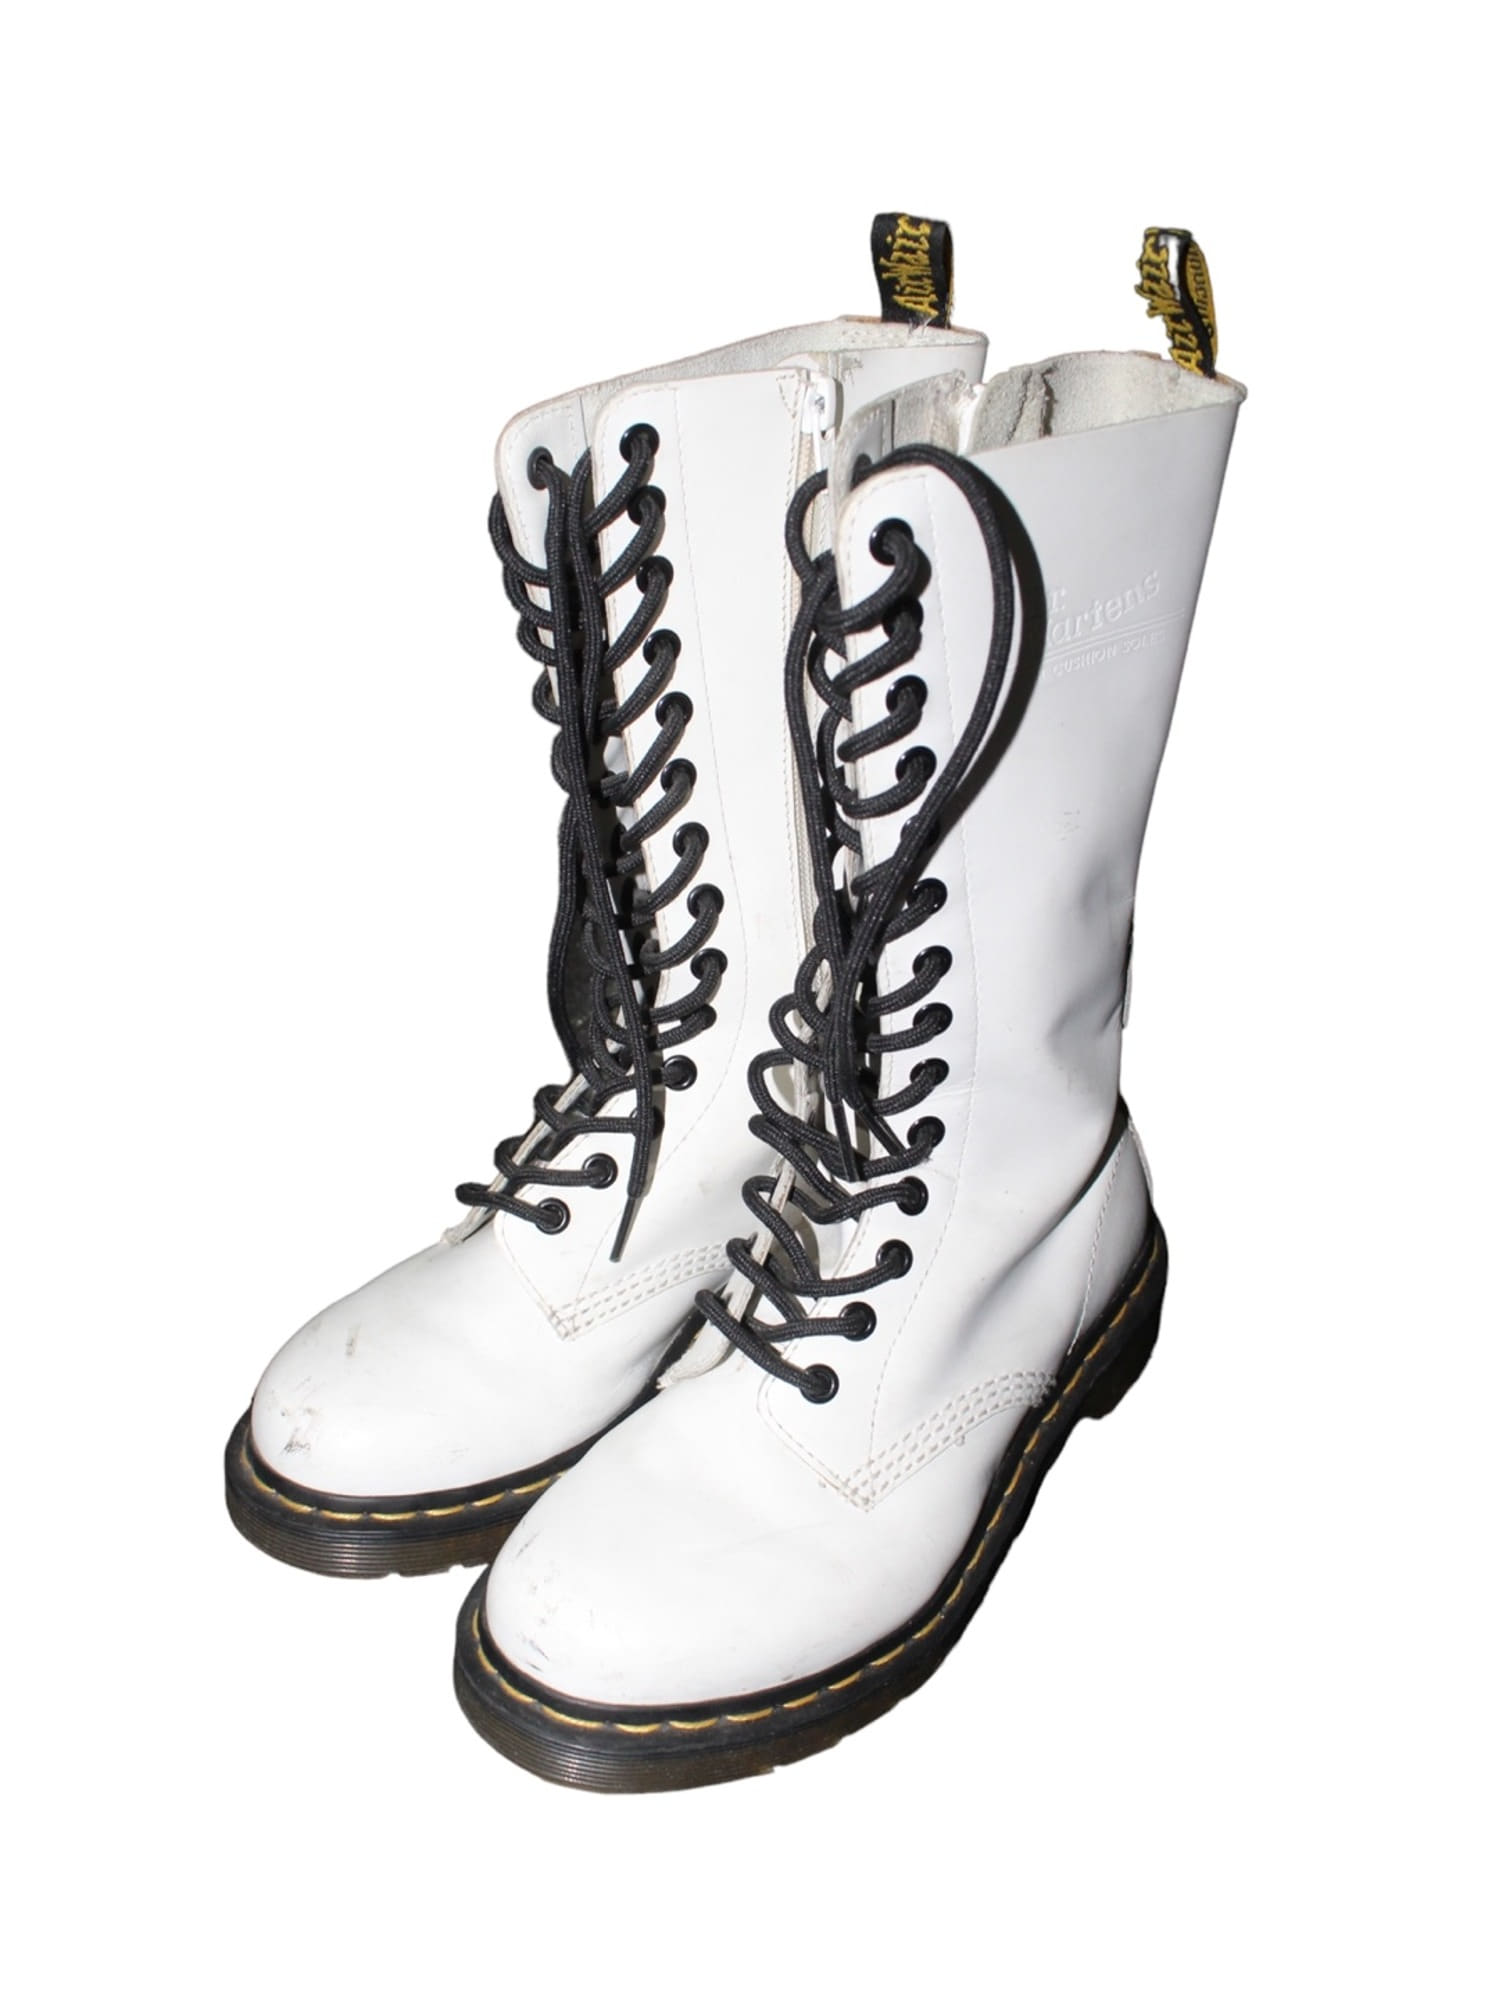 Dr. Martens 1914 14 Eye Smooth White Leather Mid Calf Tall Combat Boots US 6 UK 4 EU 37